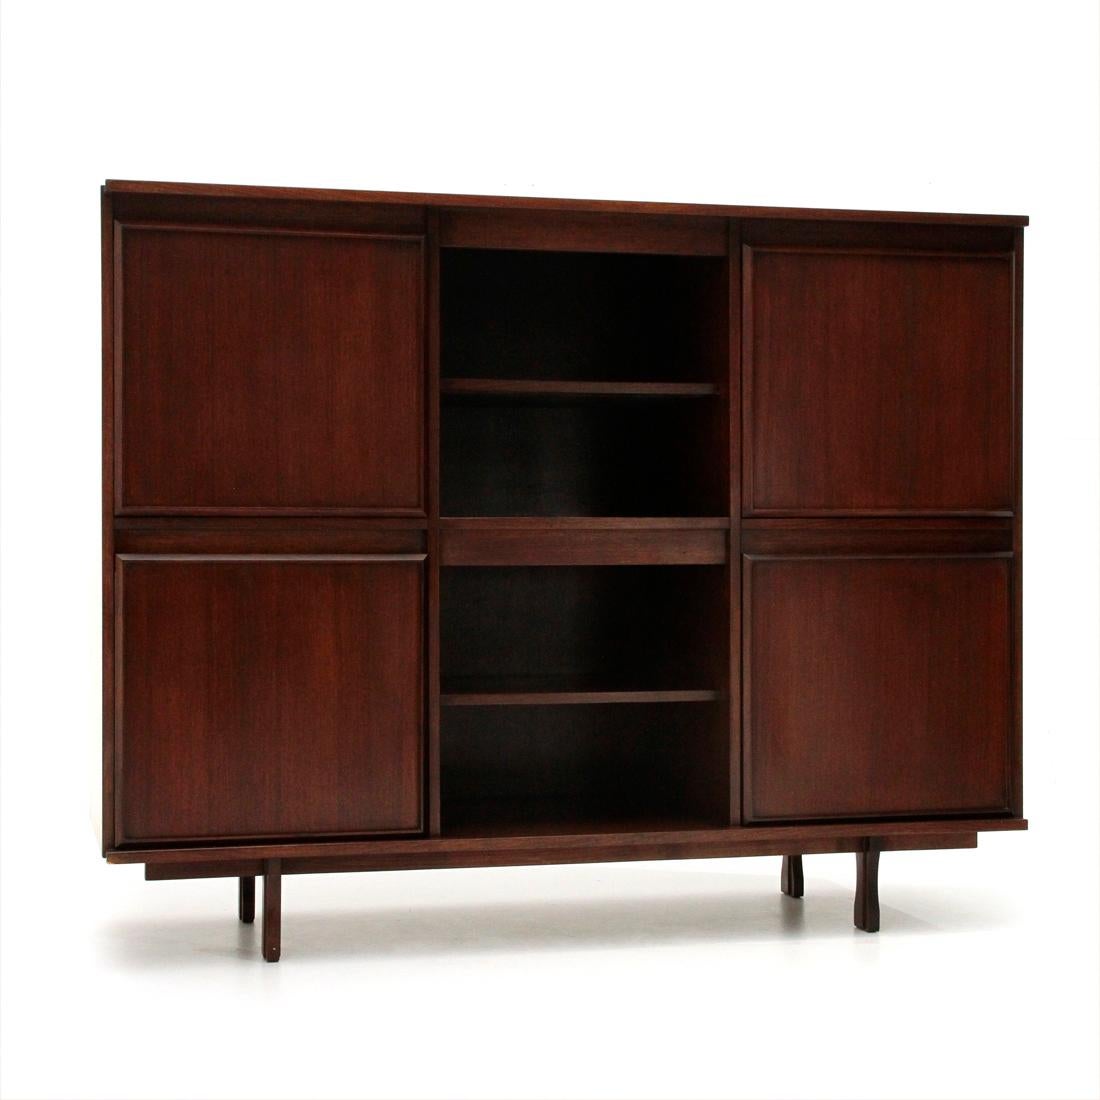 Sideboard produced by Stilwood in the 1960s based on a design by Giovanni Ausenda.
Structure in veneered wood.
Two central open compartments with shelf.
Side compartments with door, recessed handle and internal shelf.
Lower left compartment with